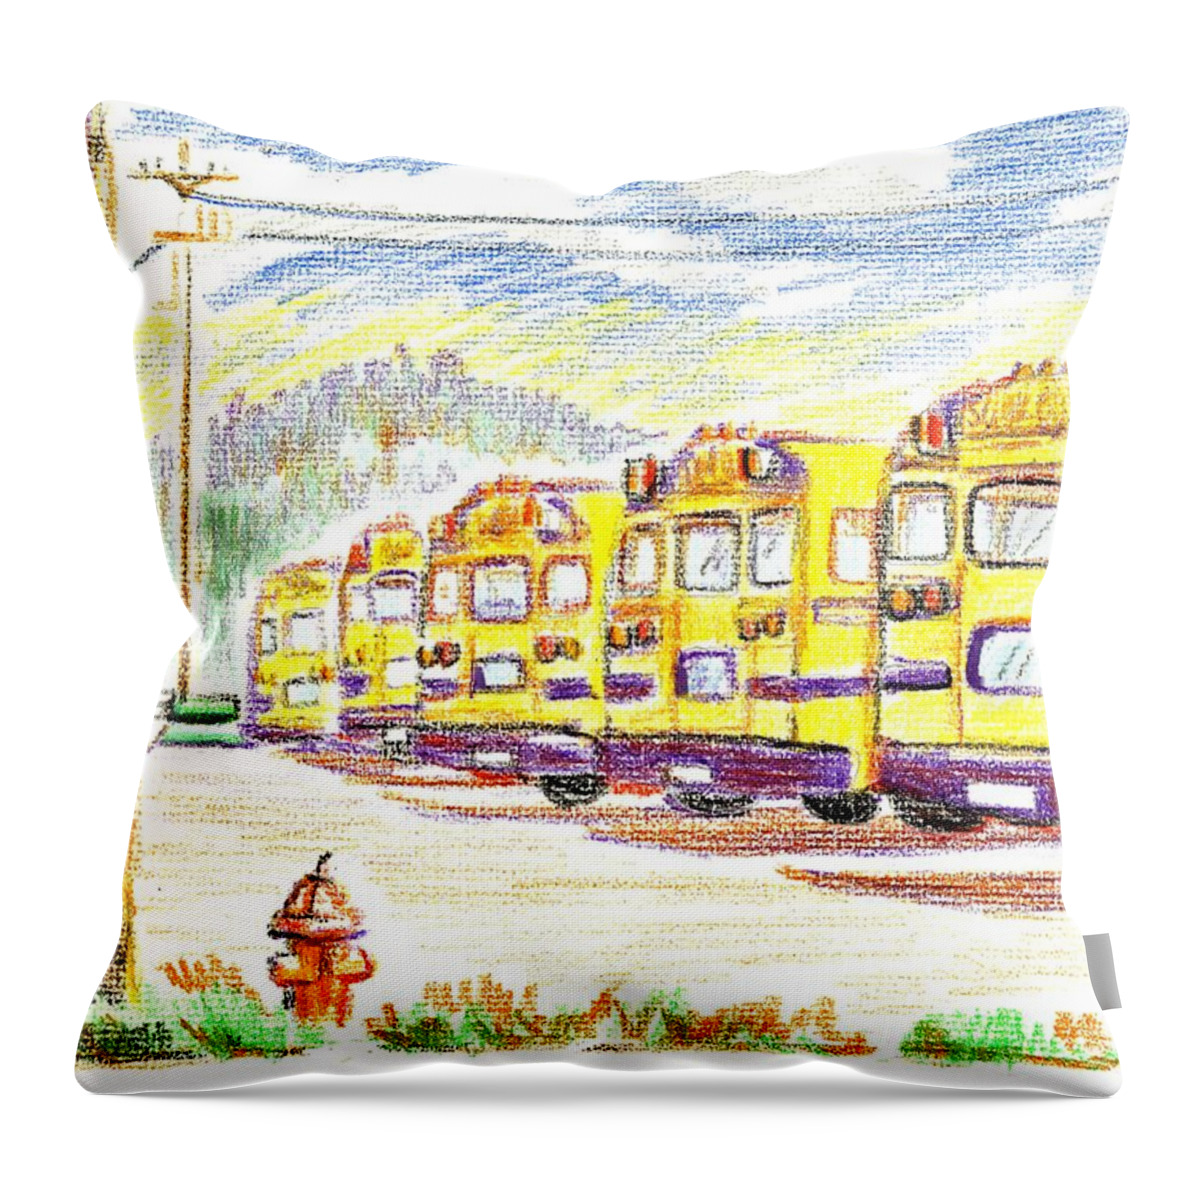 School Bussiness Throw Pillow featuring the mixed media School Bussiness by Kip DeVore